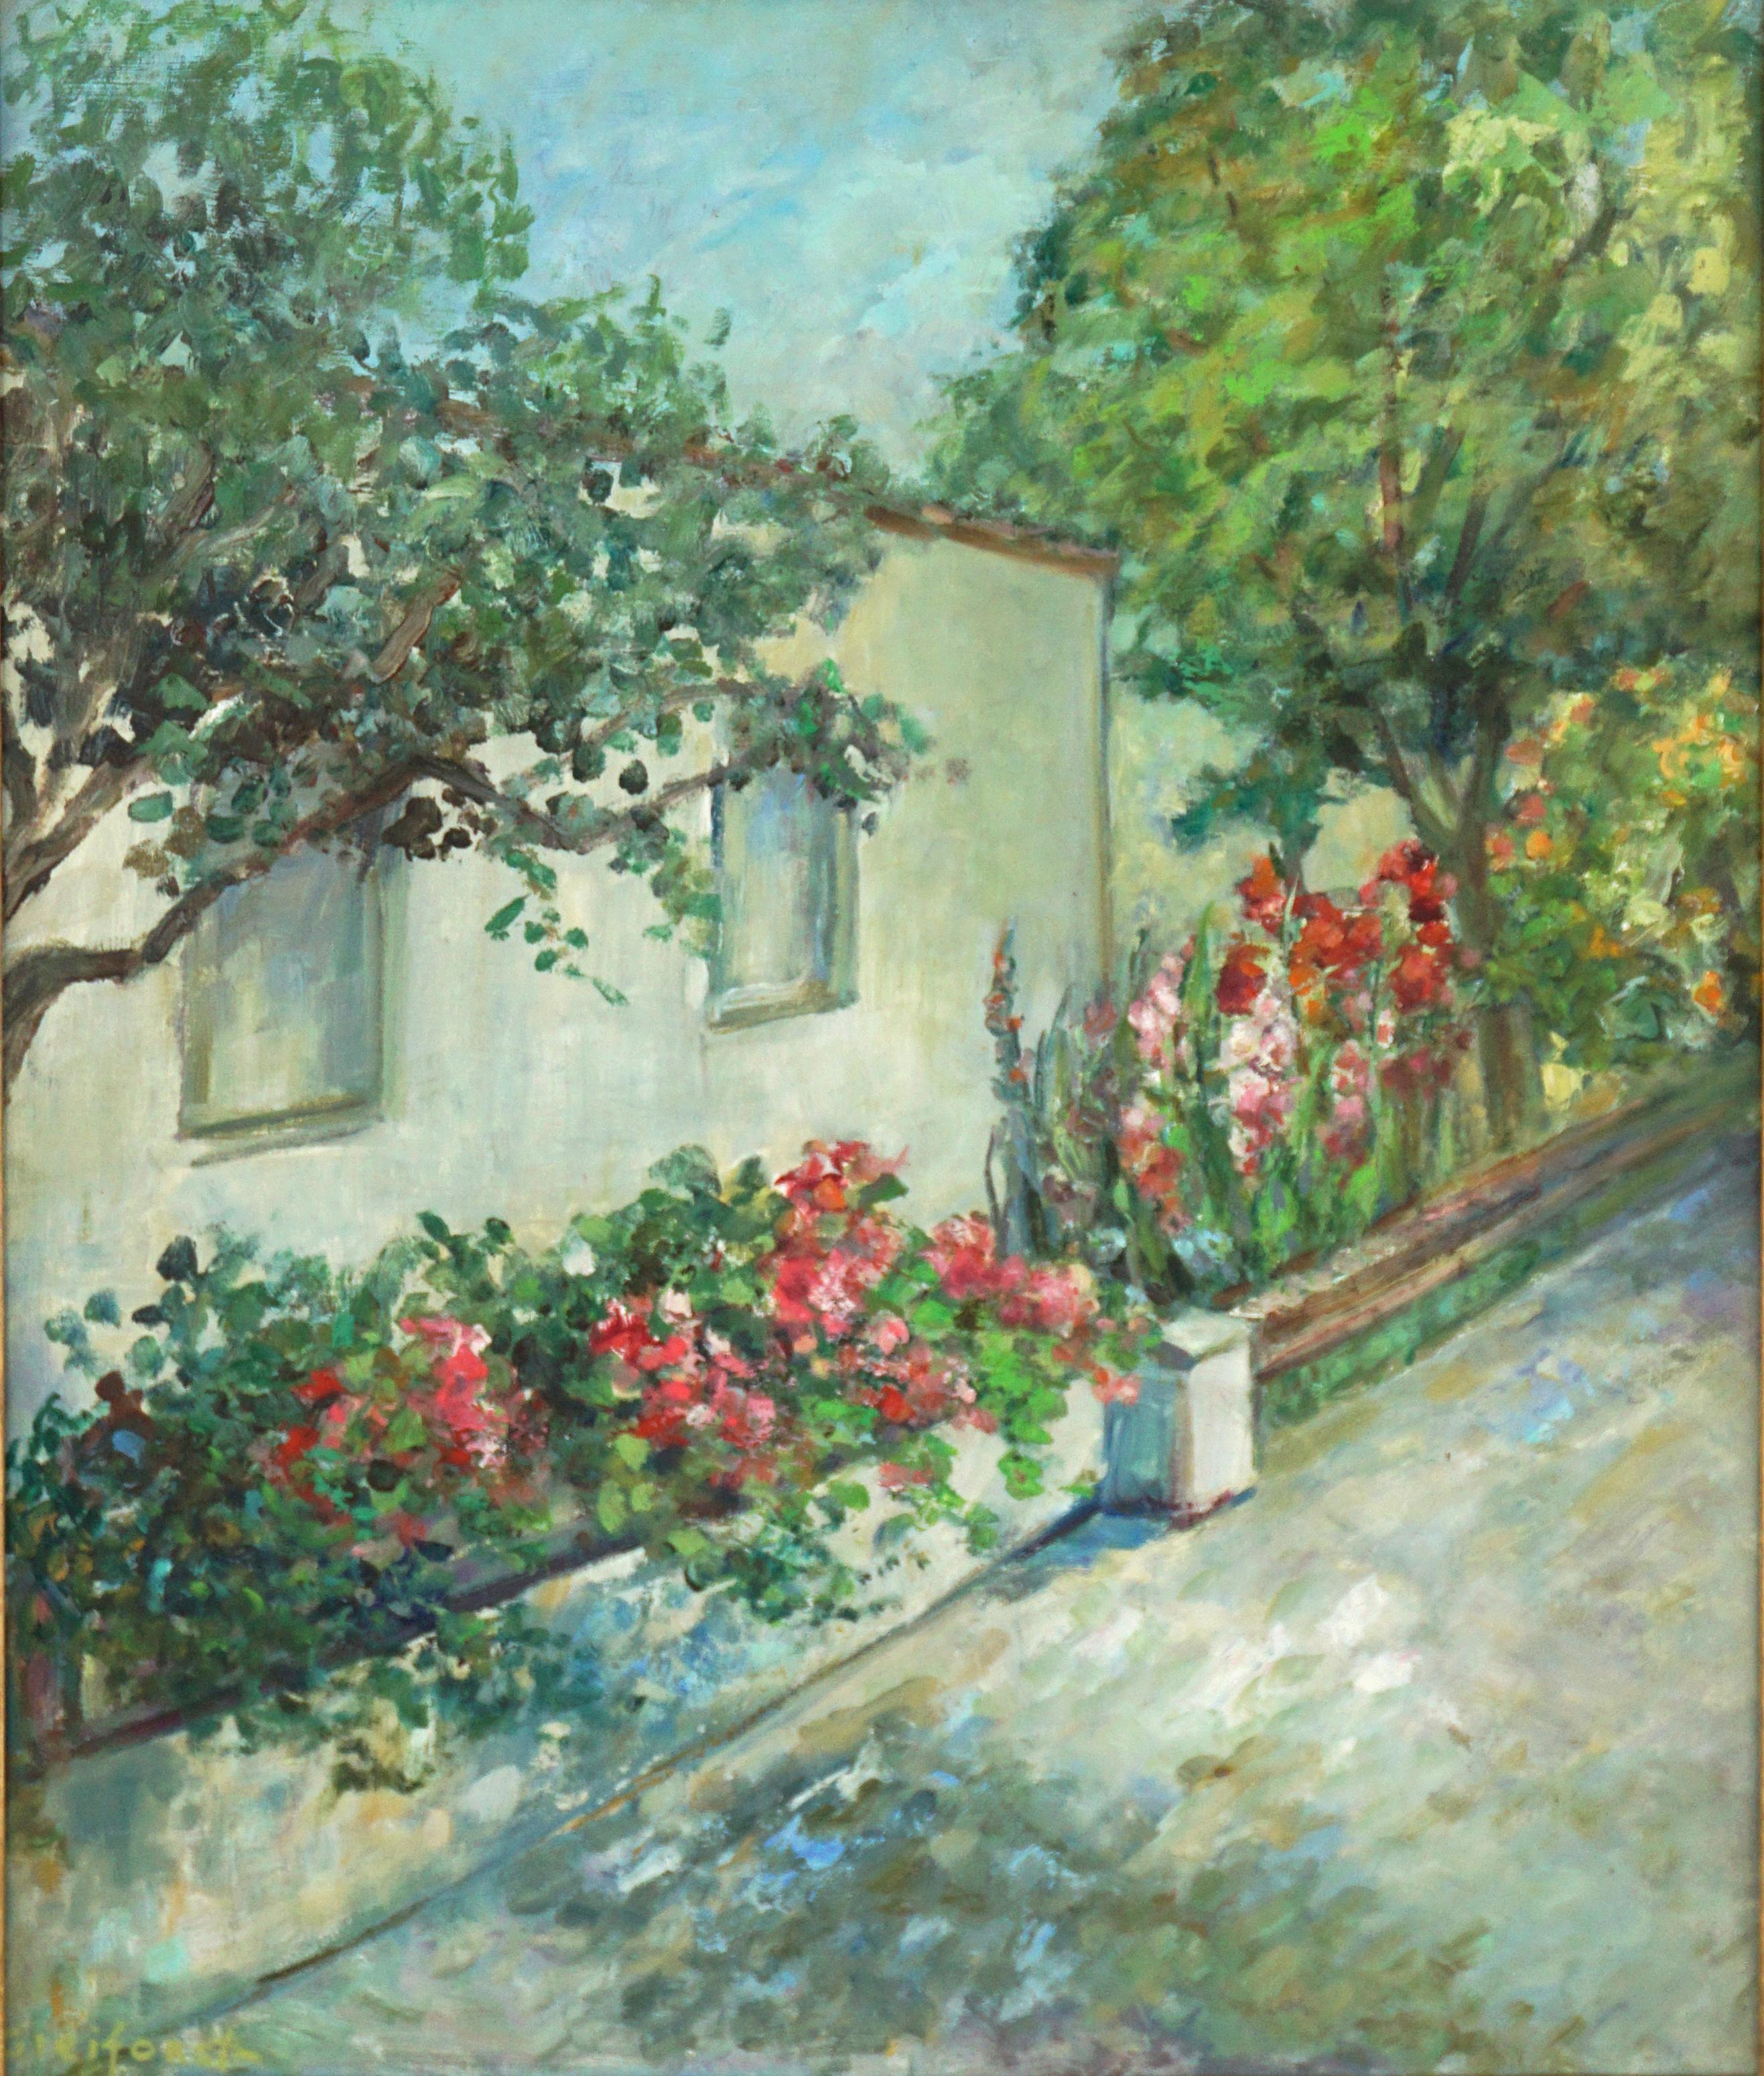 Mid Century Carmel Cottage with Flowers Landscape - Painting by Helen Enoch Gleiforst